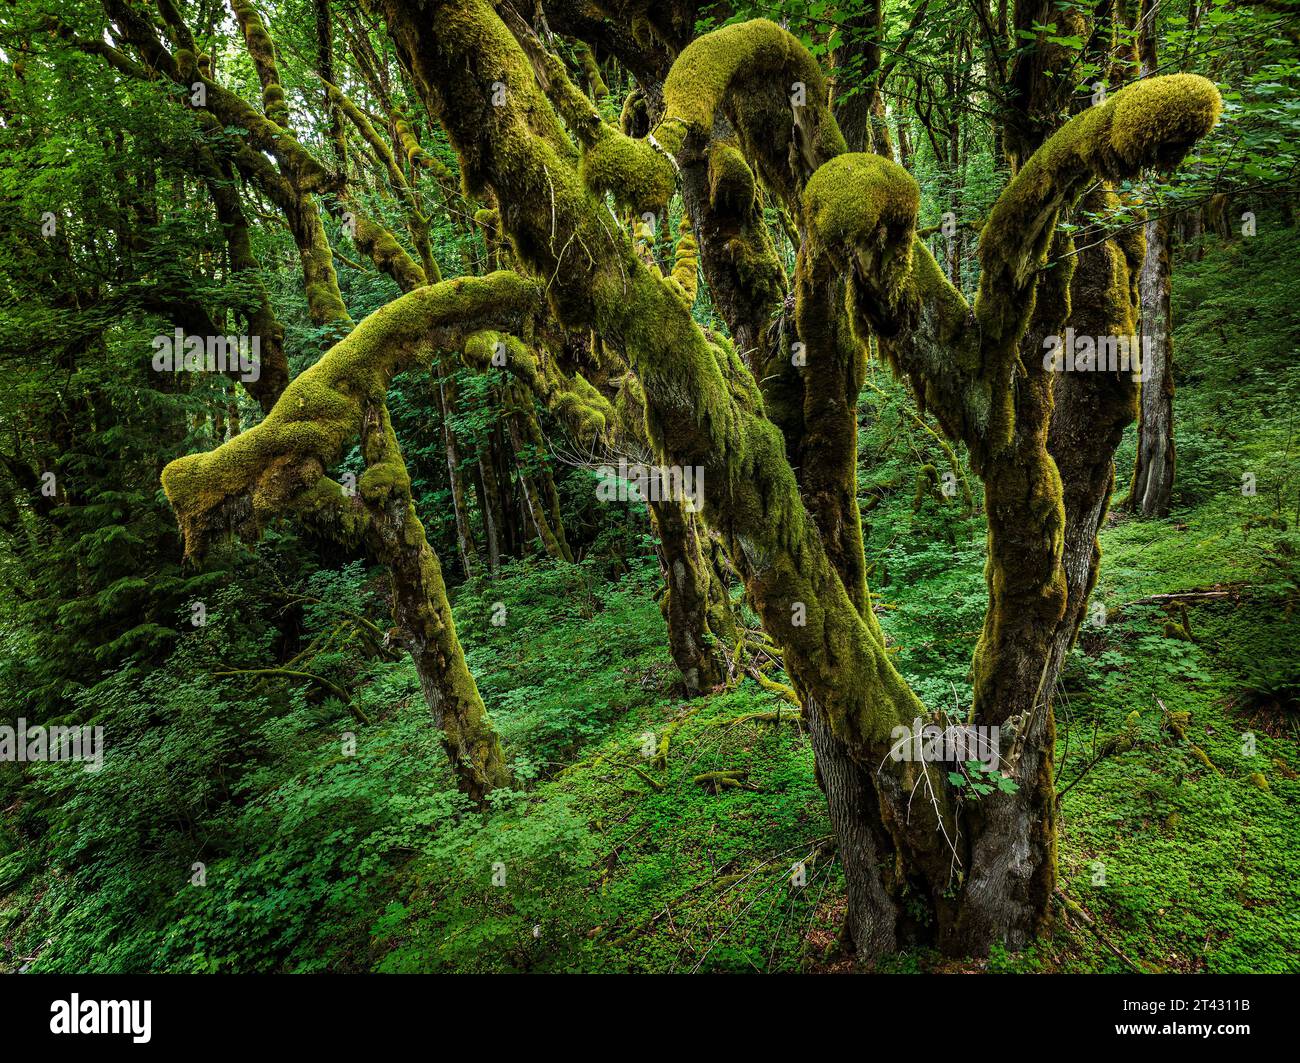 Close-up of moss covered trees in a forest landscape near Mt Baker, Washington, USA Stock Photo